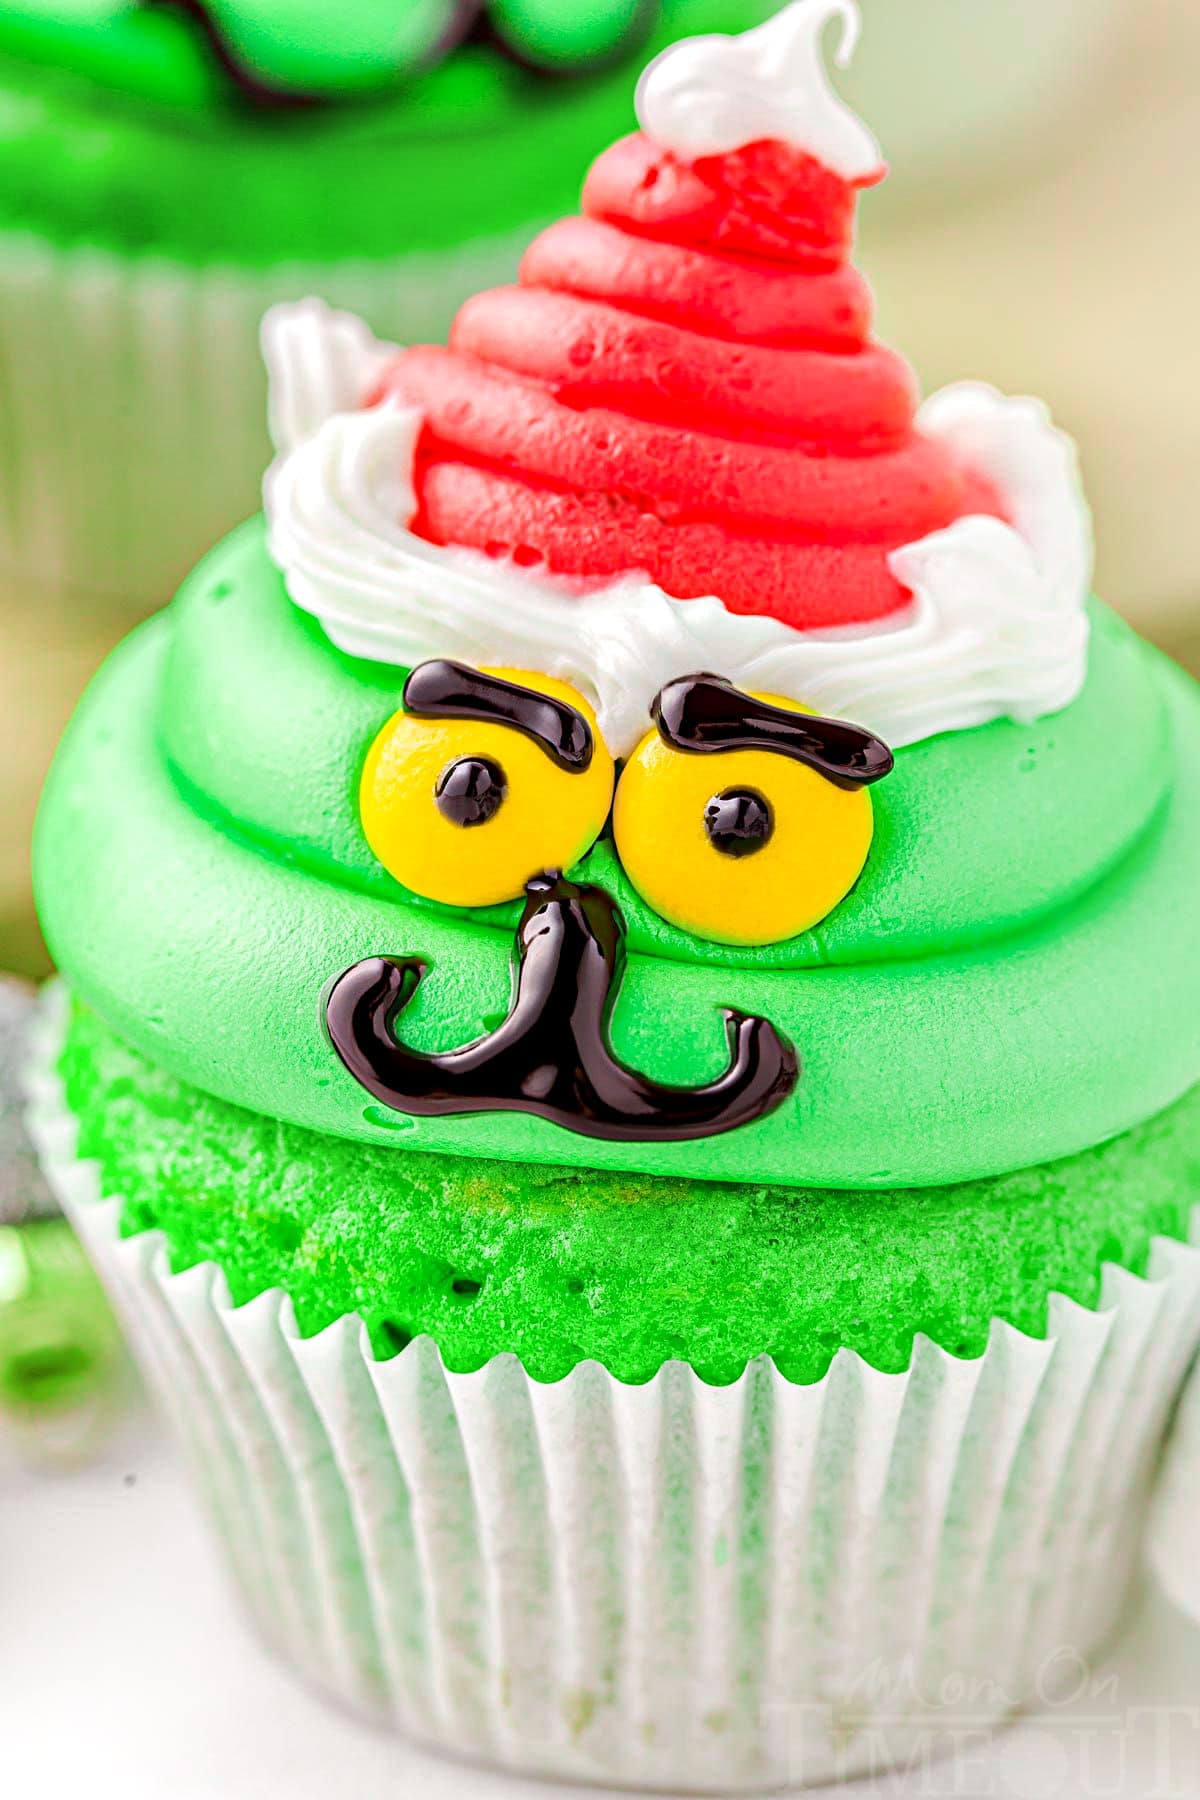 close up look at grinch decorated cupcake complete with santa hat. bright green frosting and cupcake.